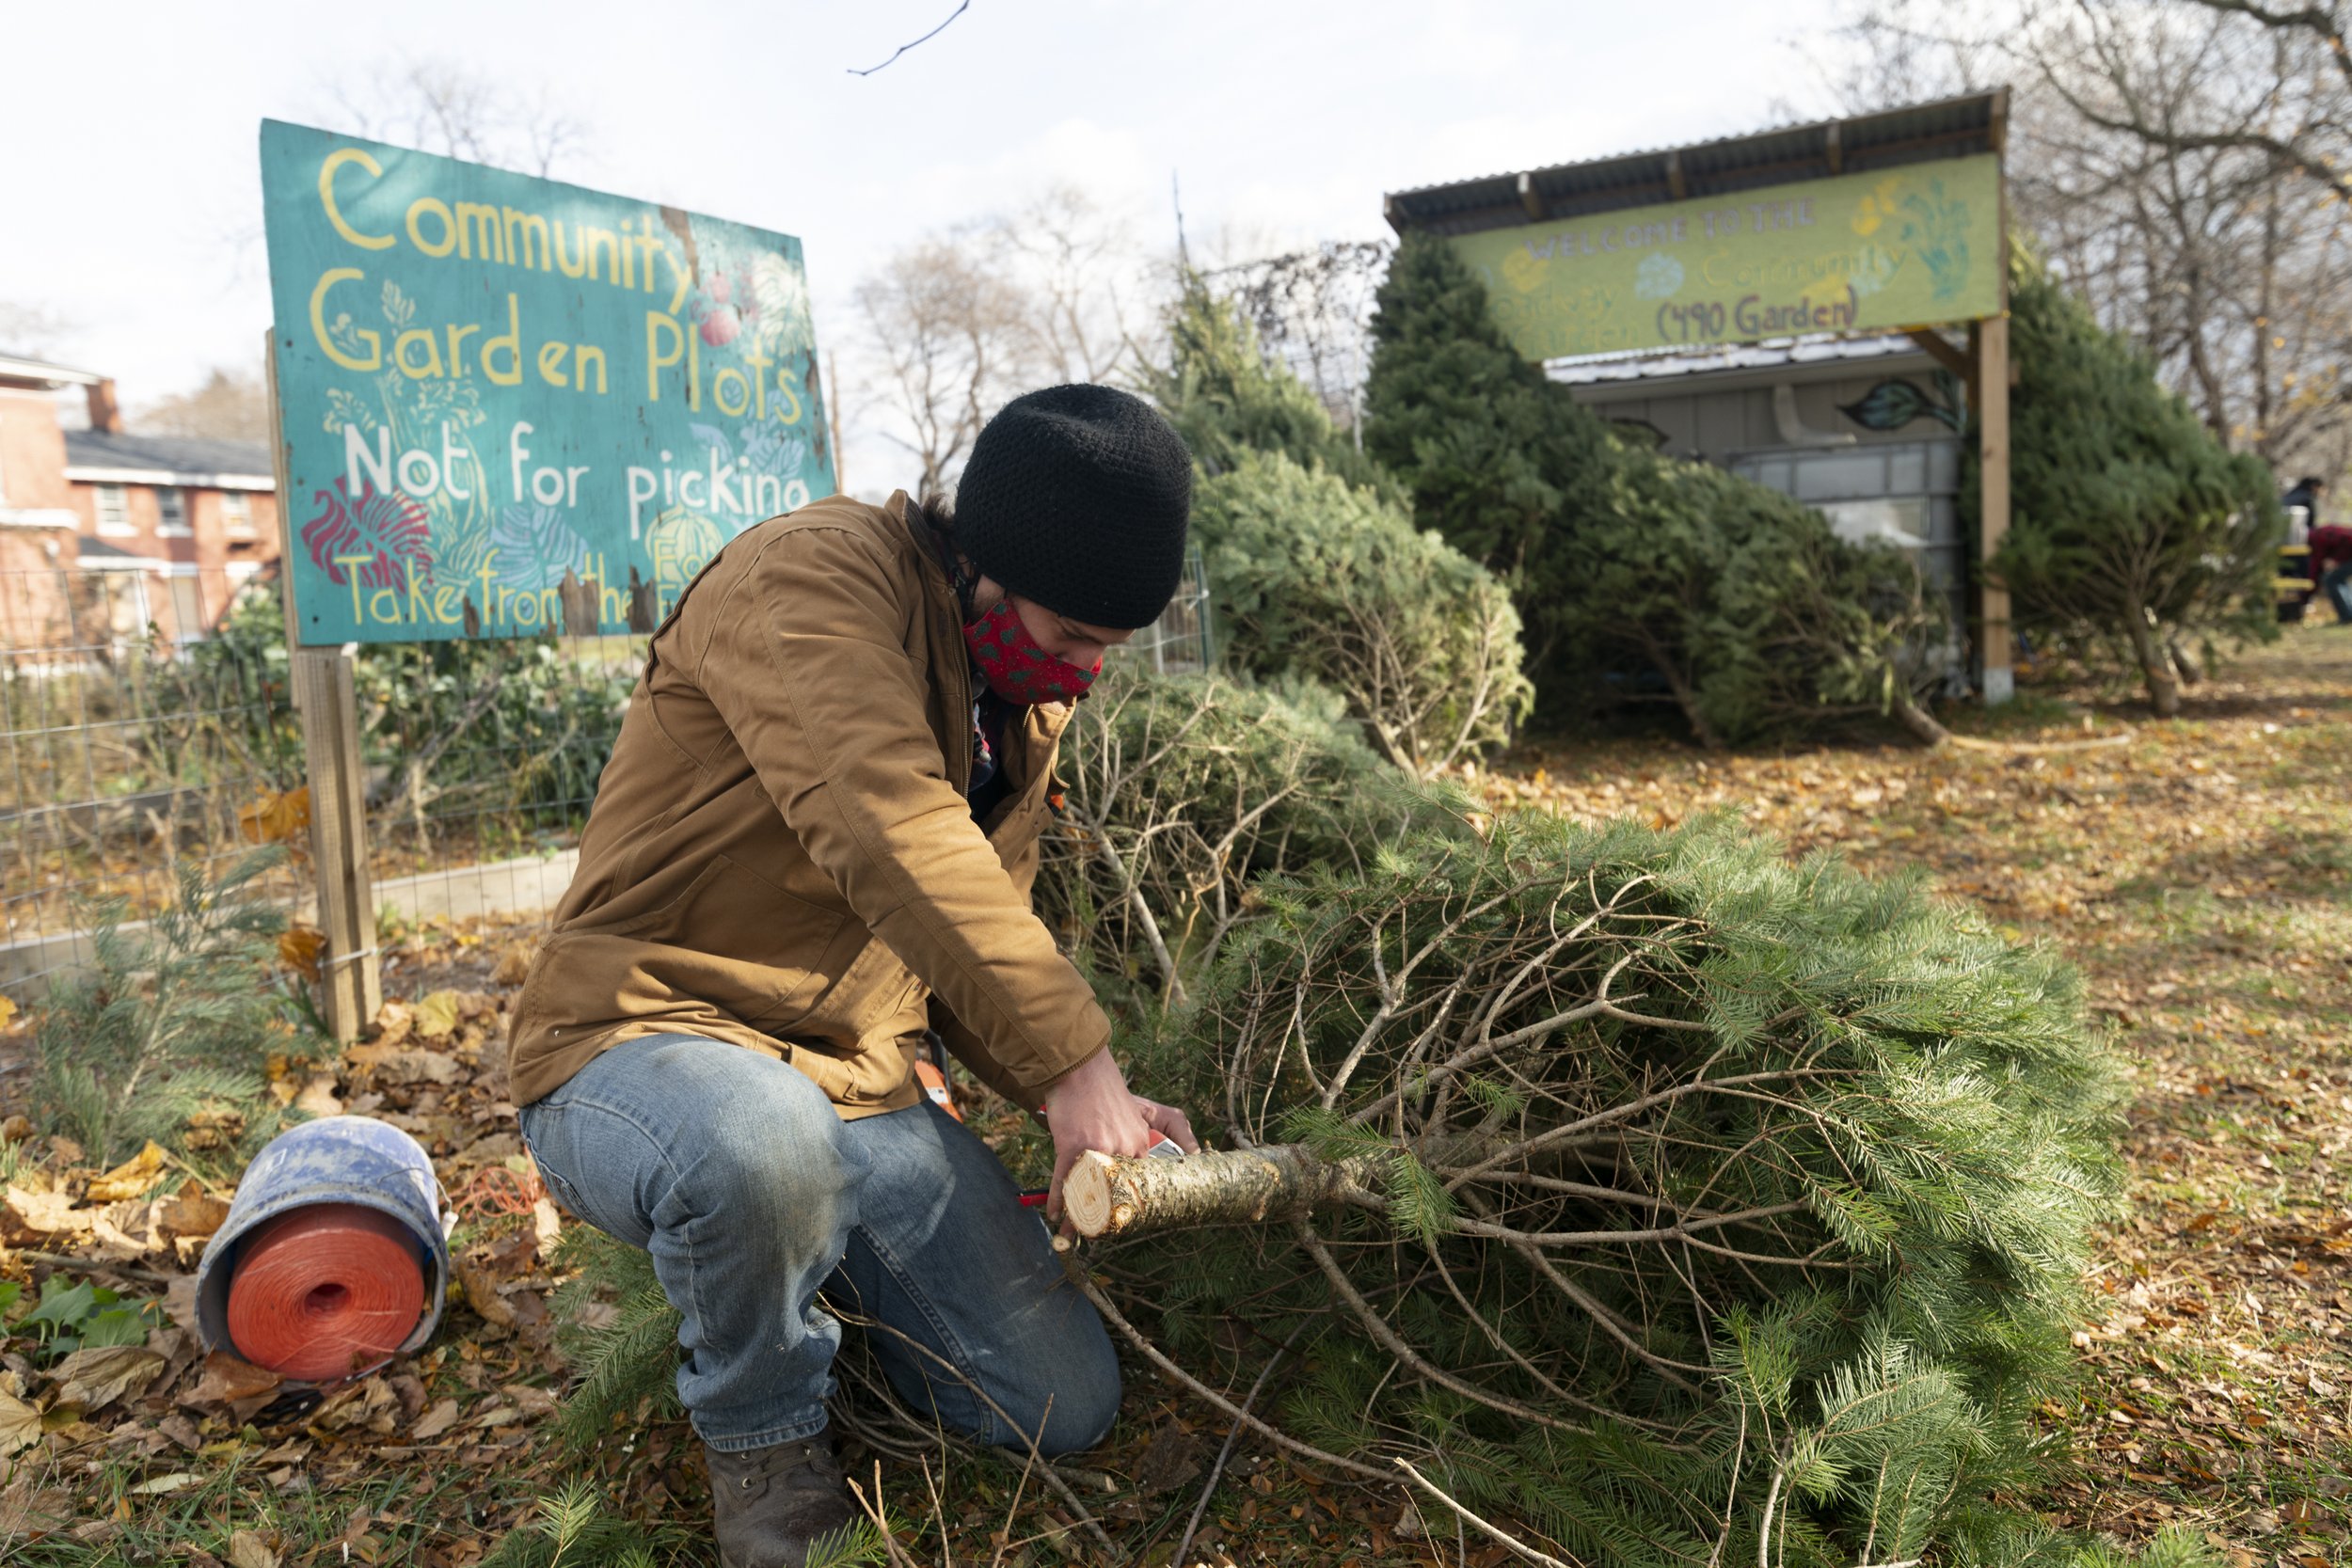  Kevin Stewart trims branches off the bottom of a sold Christmas tree at 490 Farmers. The garden sold Christmas trees to local residents on Dec. 4, 2021, in Rochester, N.Y. The fundraiser was a success, raising money for the coming spring season.  